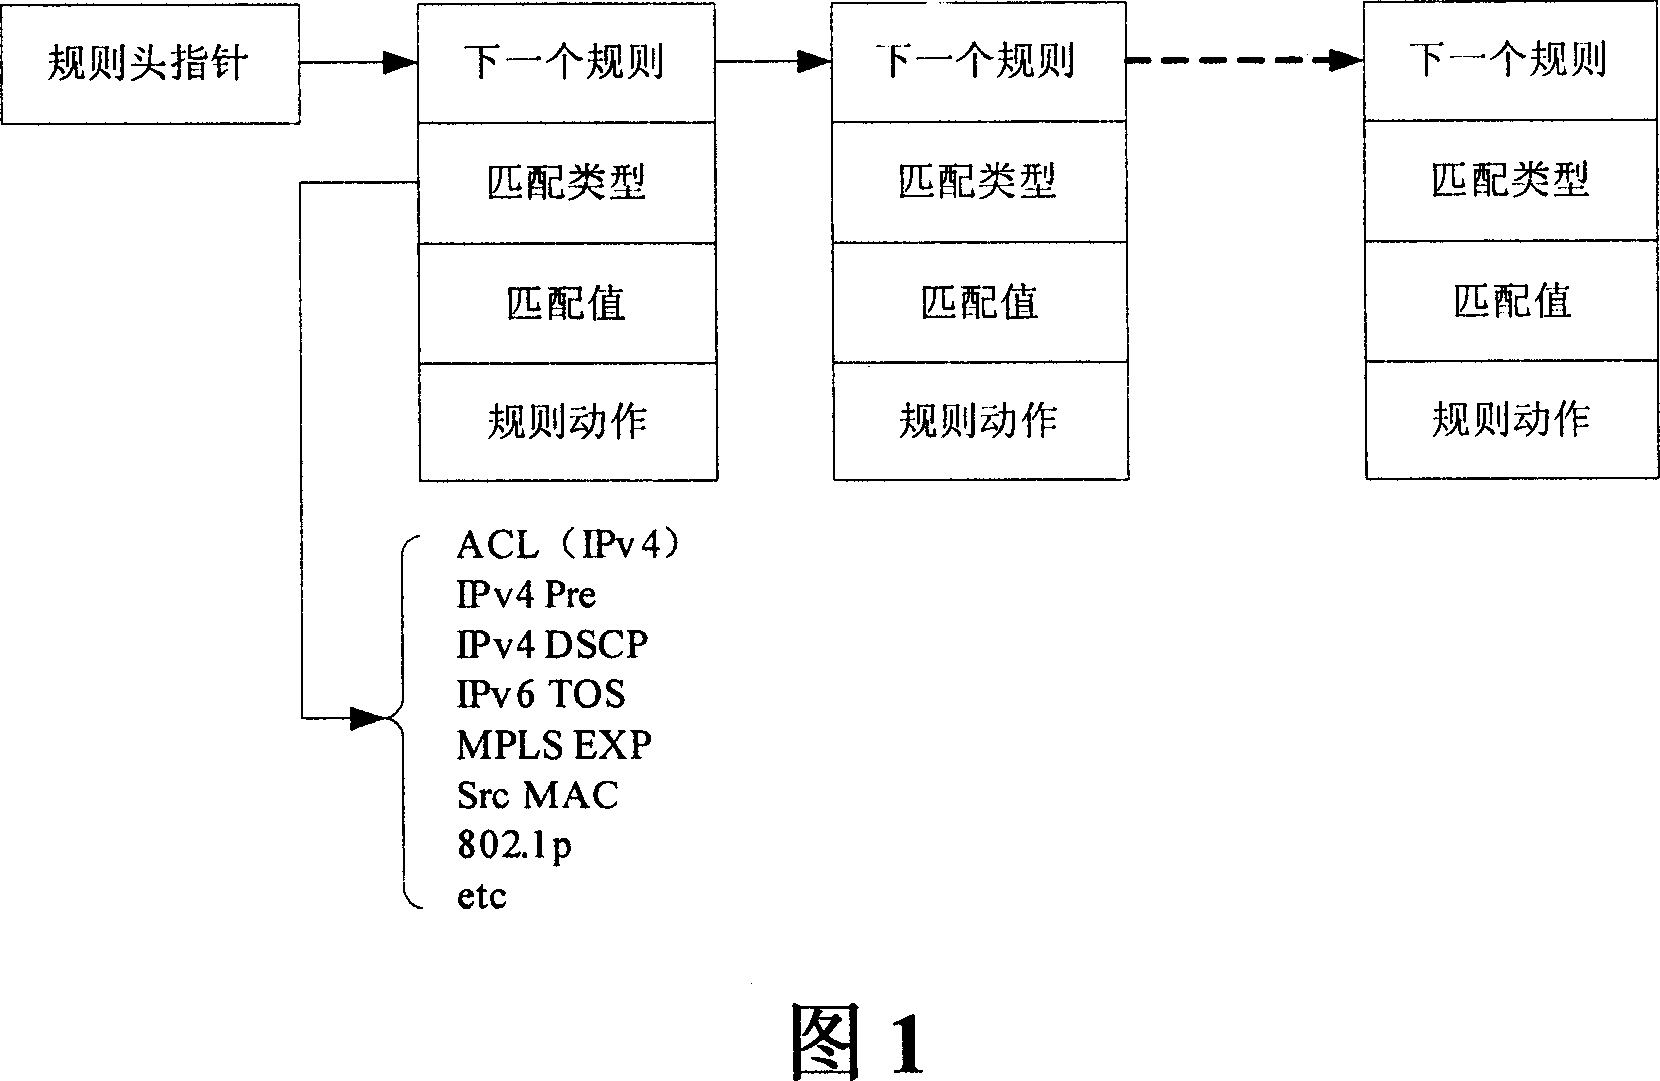 Integrated processing method for three-folded content addressable memory message classification